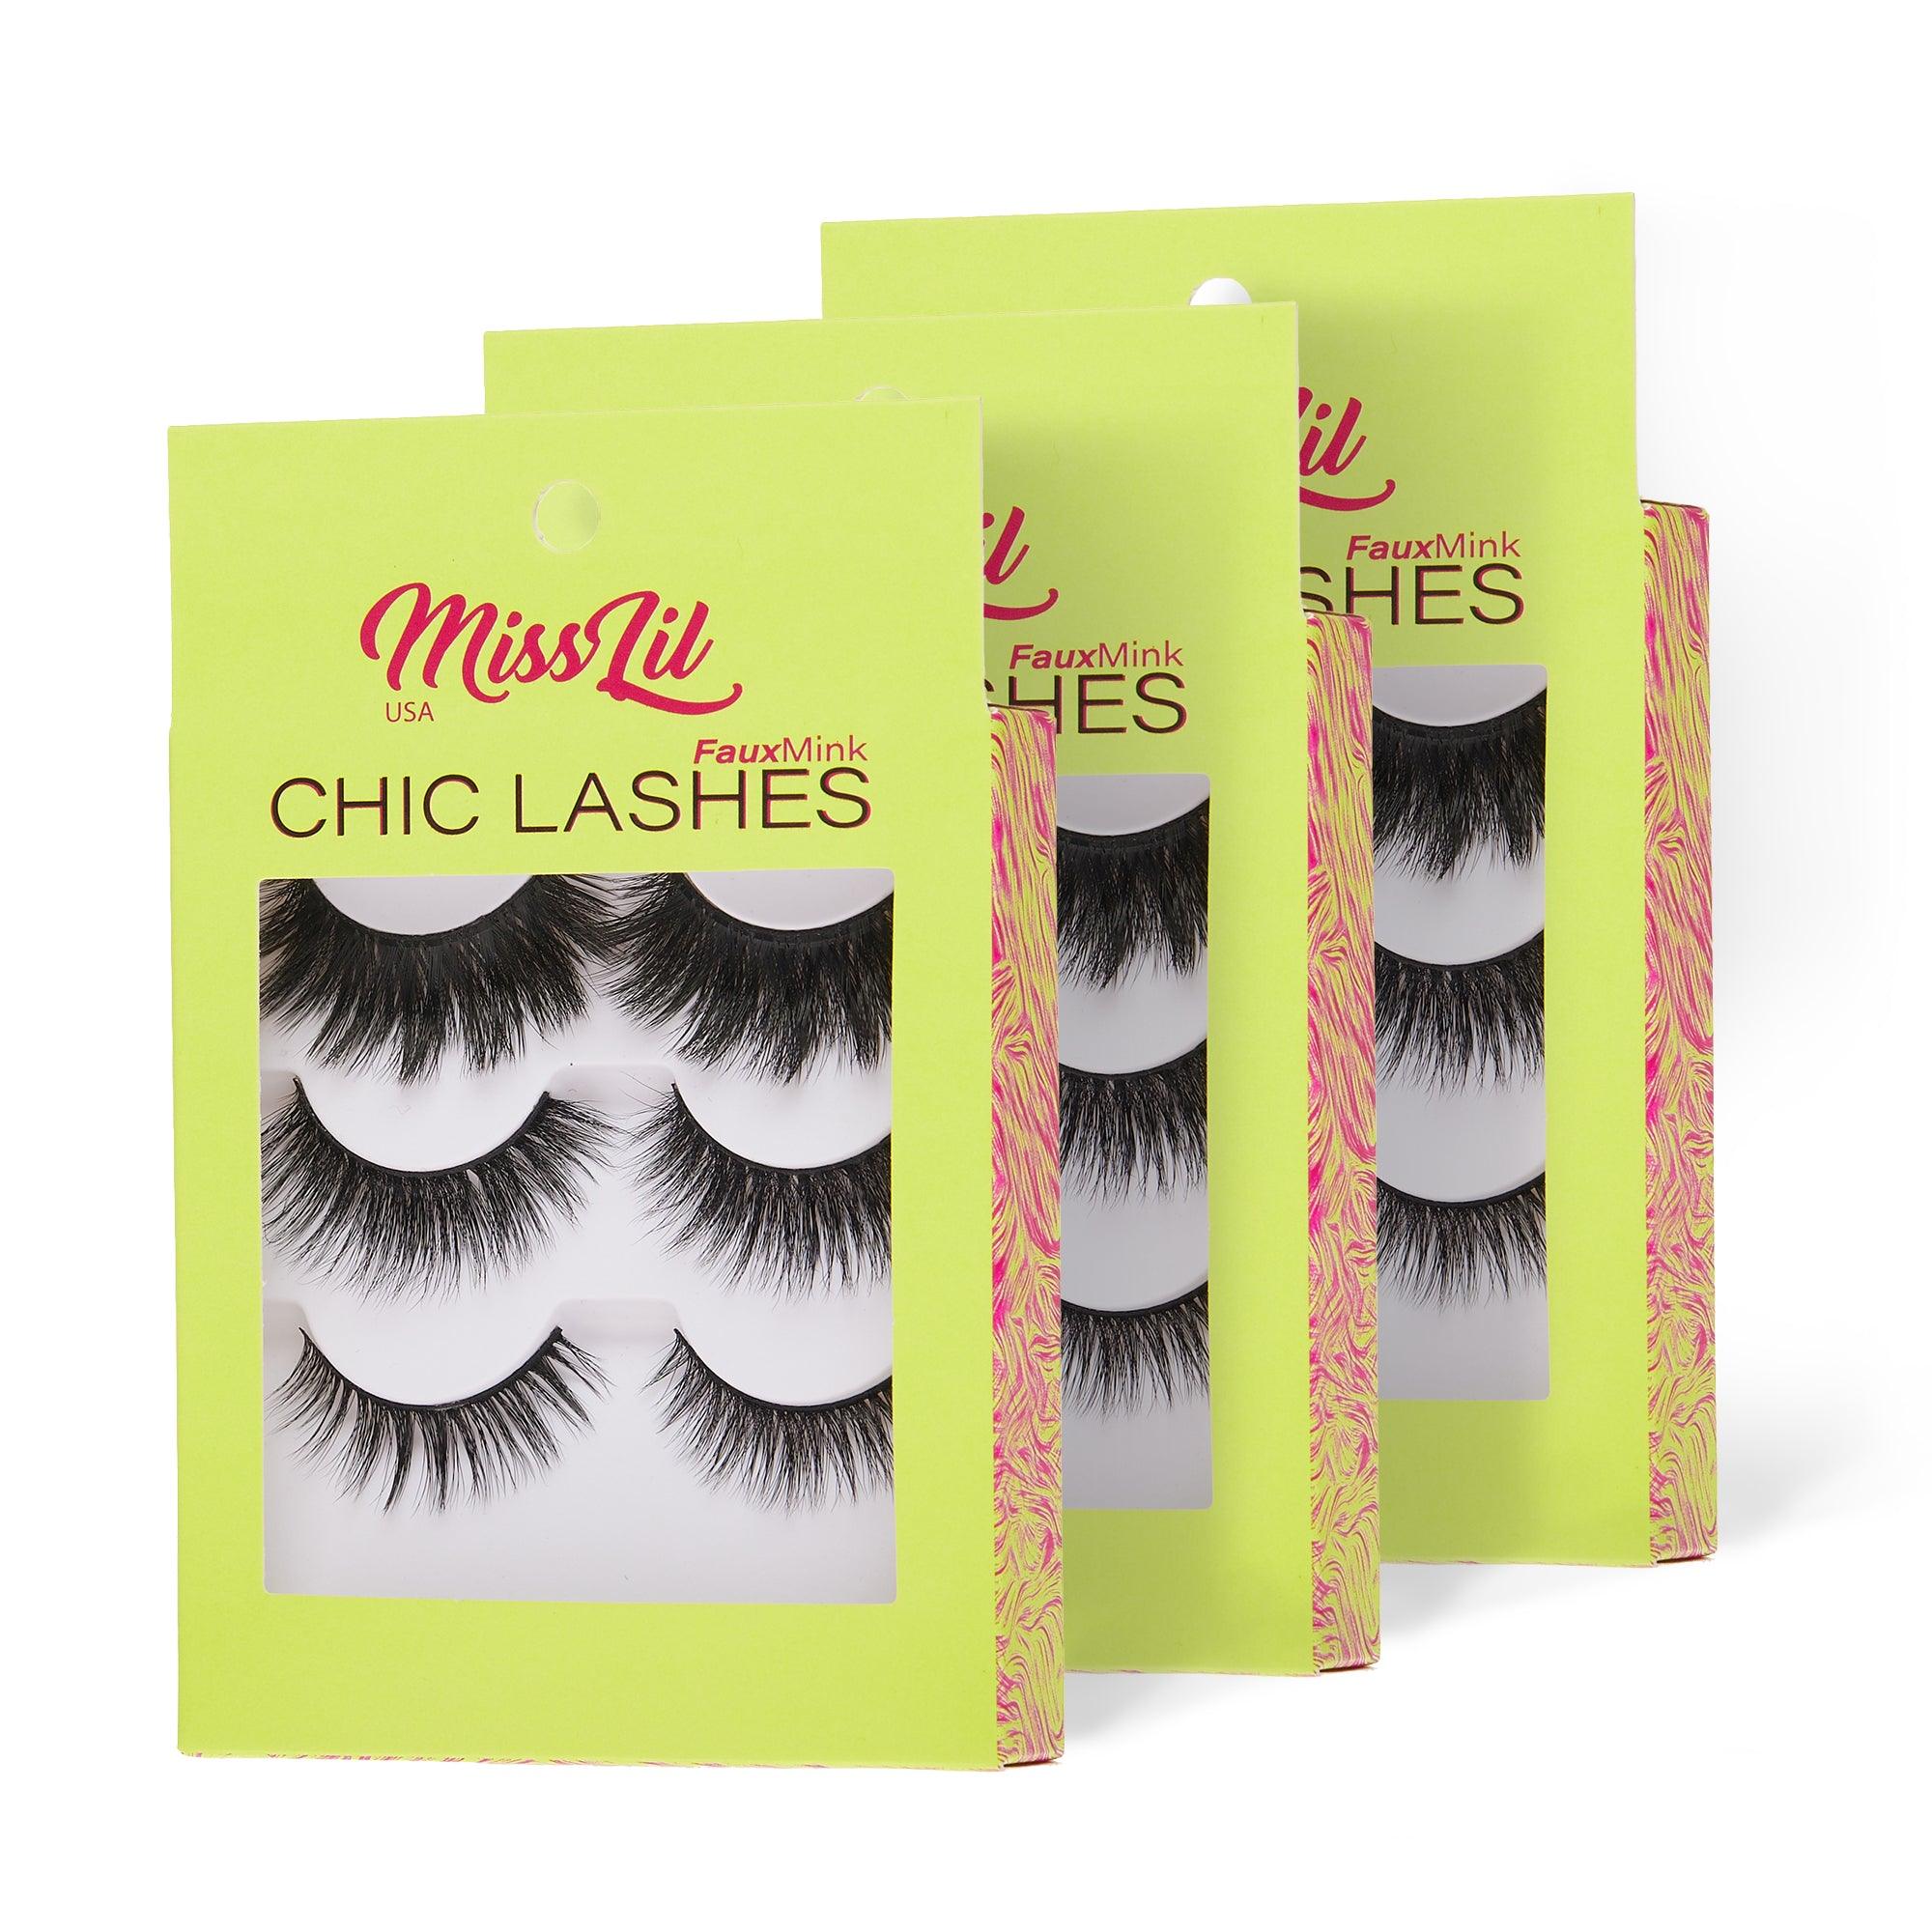 3-Pairs Lashes-Chic Lashes Collection #40 (Pack of 12) - Miss Lil USA Wholesale